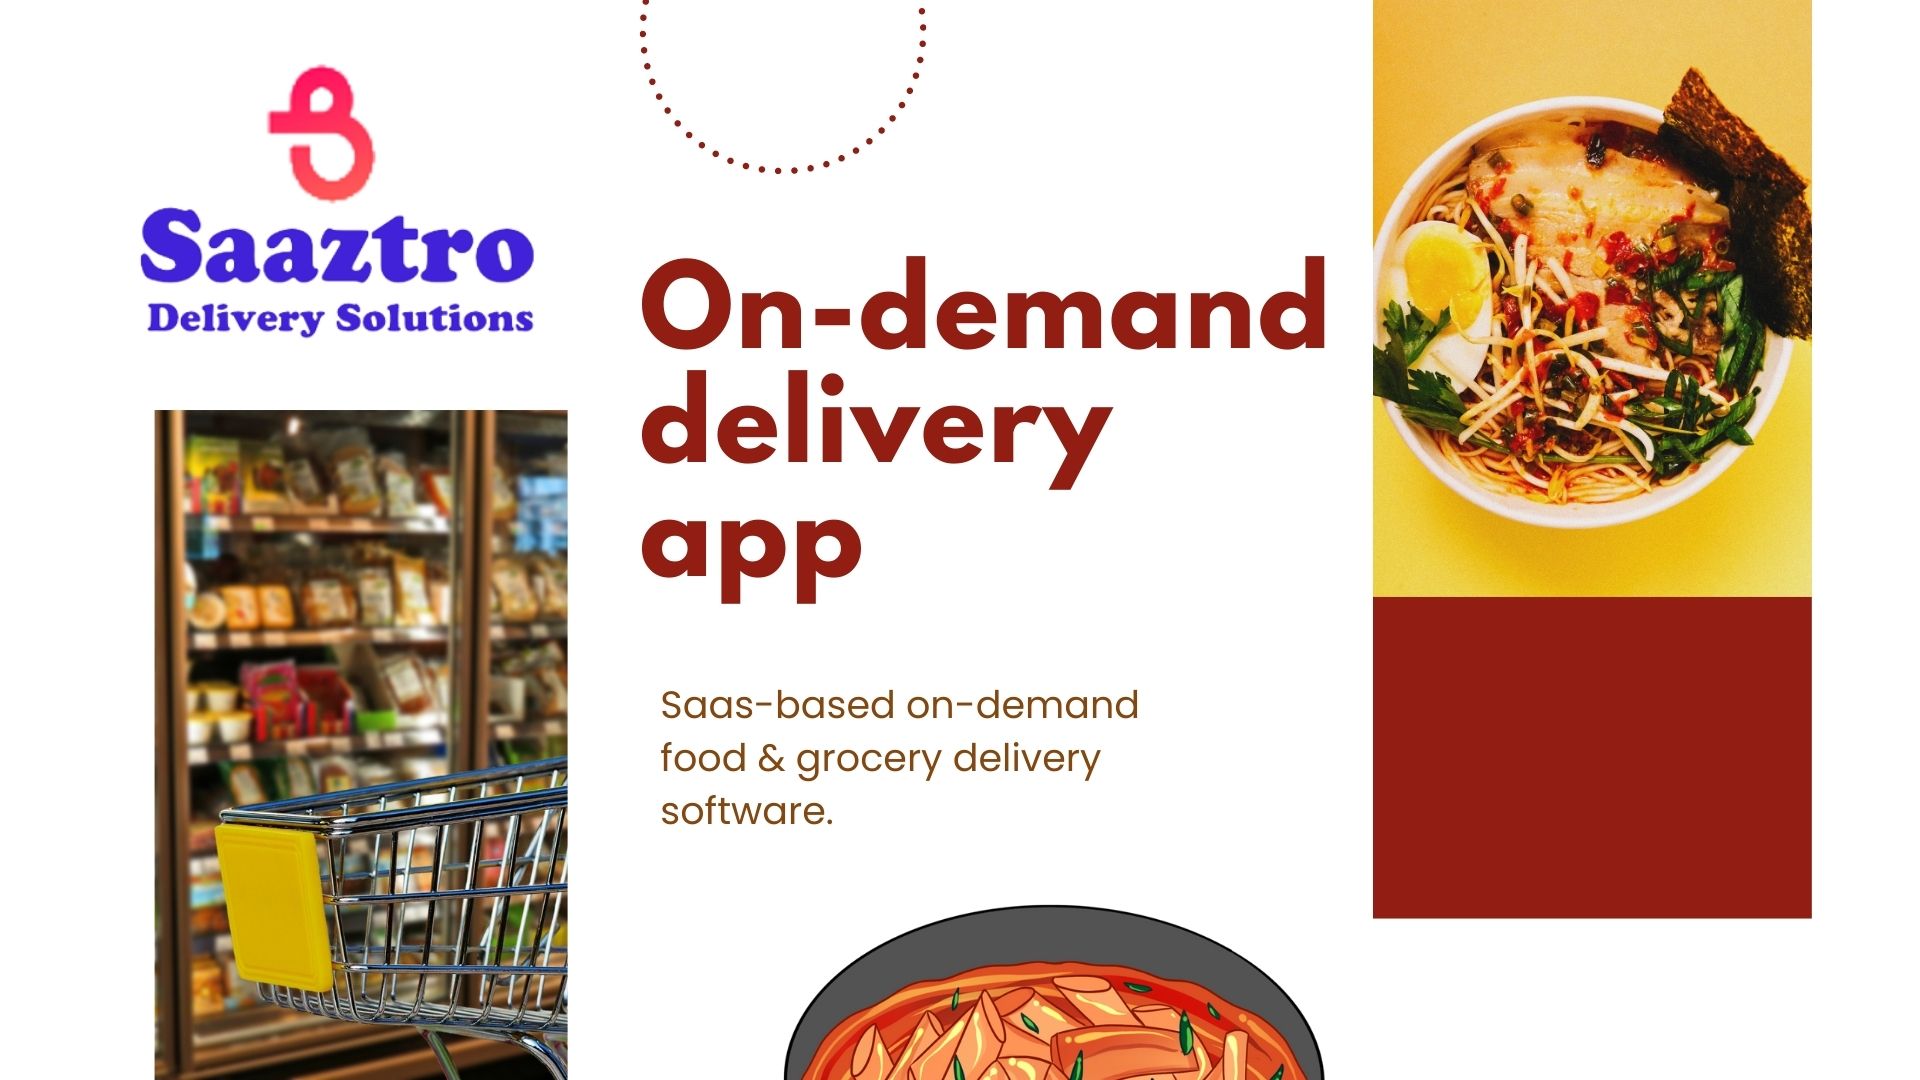 Saaztro

Delivery Solutions O n= d eman el
delivery
app

Saas-based on-demand
food &amp; grocery delivery
software.

Ps.